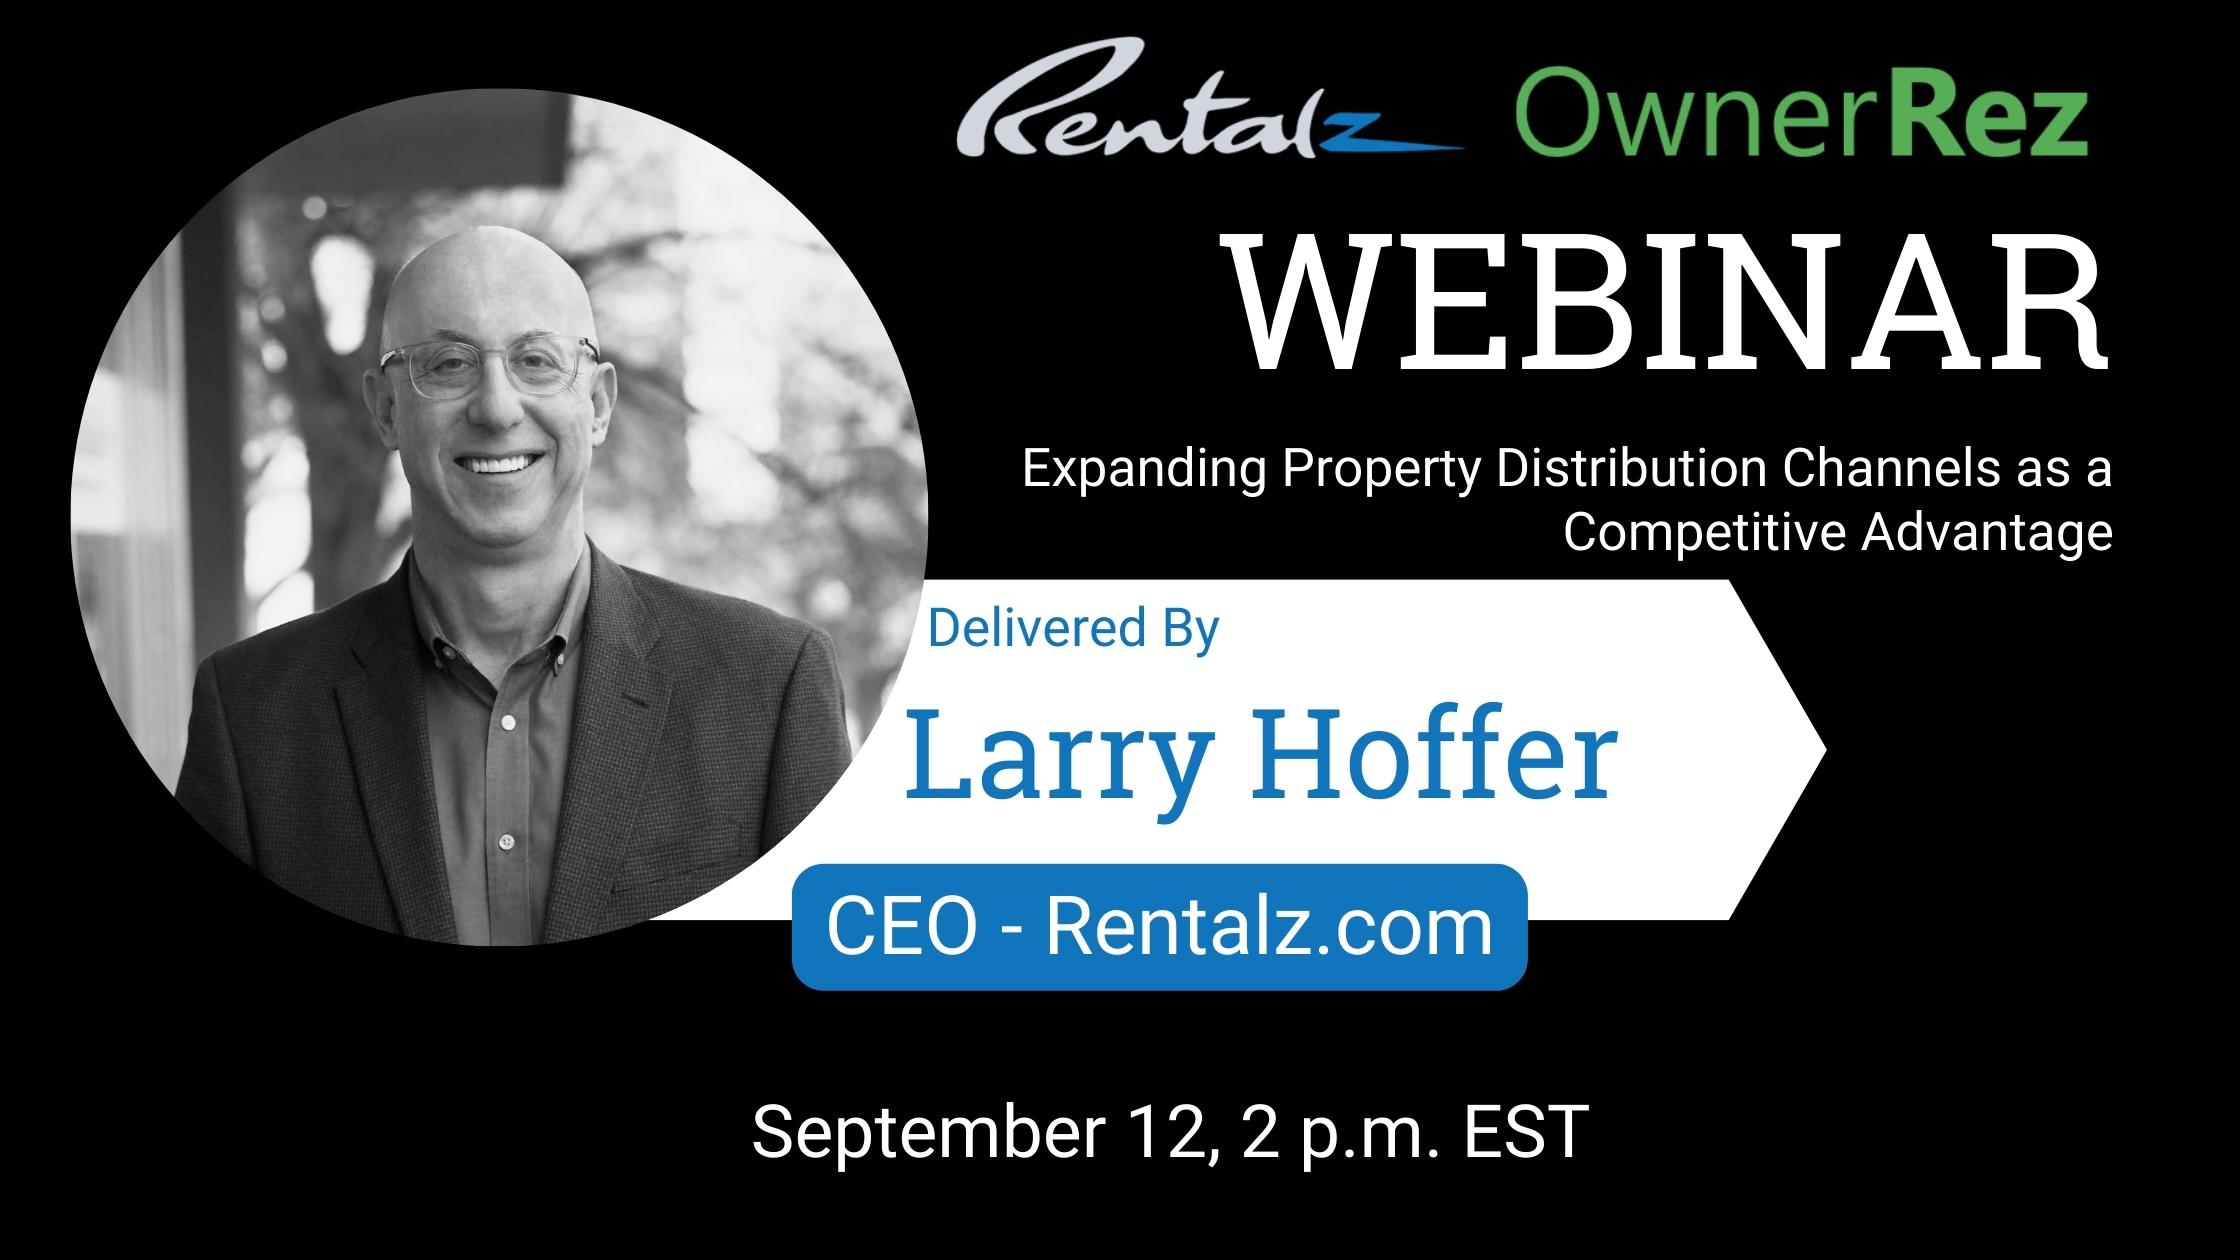 Get Ahead of the Curve: Webinar on Expanding Property Distribution Channels